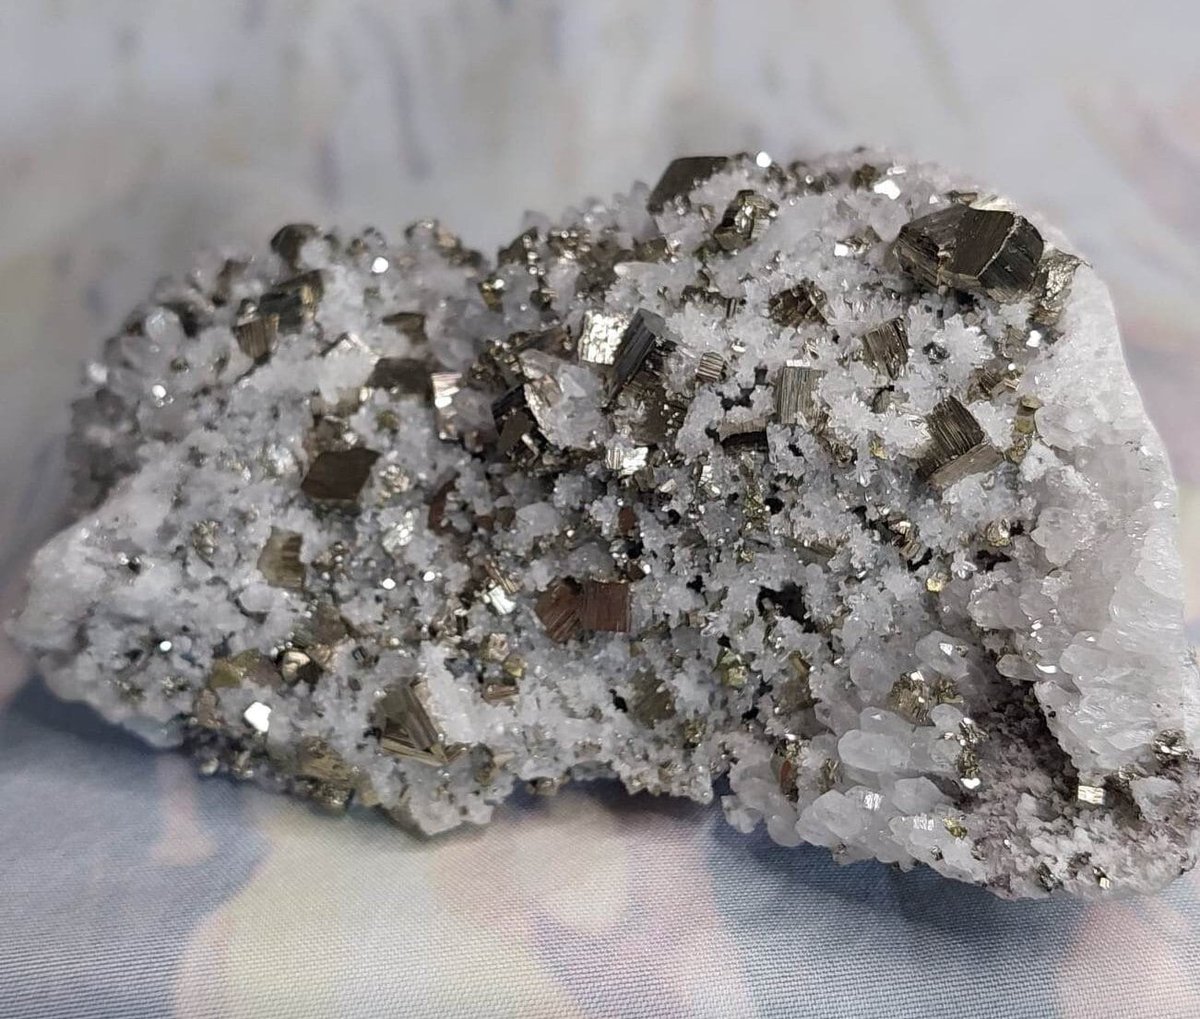 Excited to share the latest addition to my #etsy shop: Natural Pyrite with Clear Quartz Specimen etsy.me/42NcQ8f #foolsgold #pyrite #crystalspecimen #mentalclarity #protectionstone #abundance #clearquartz #pjscrystalbliss